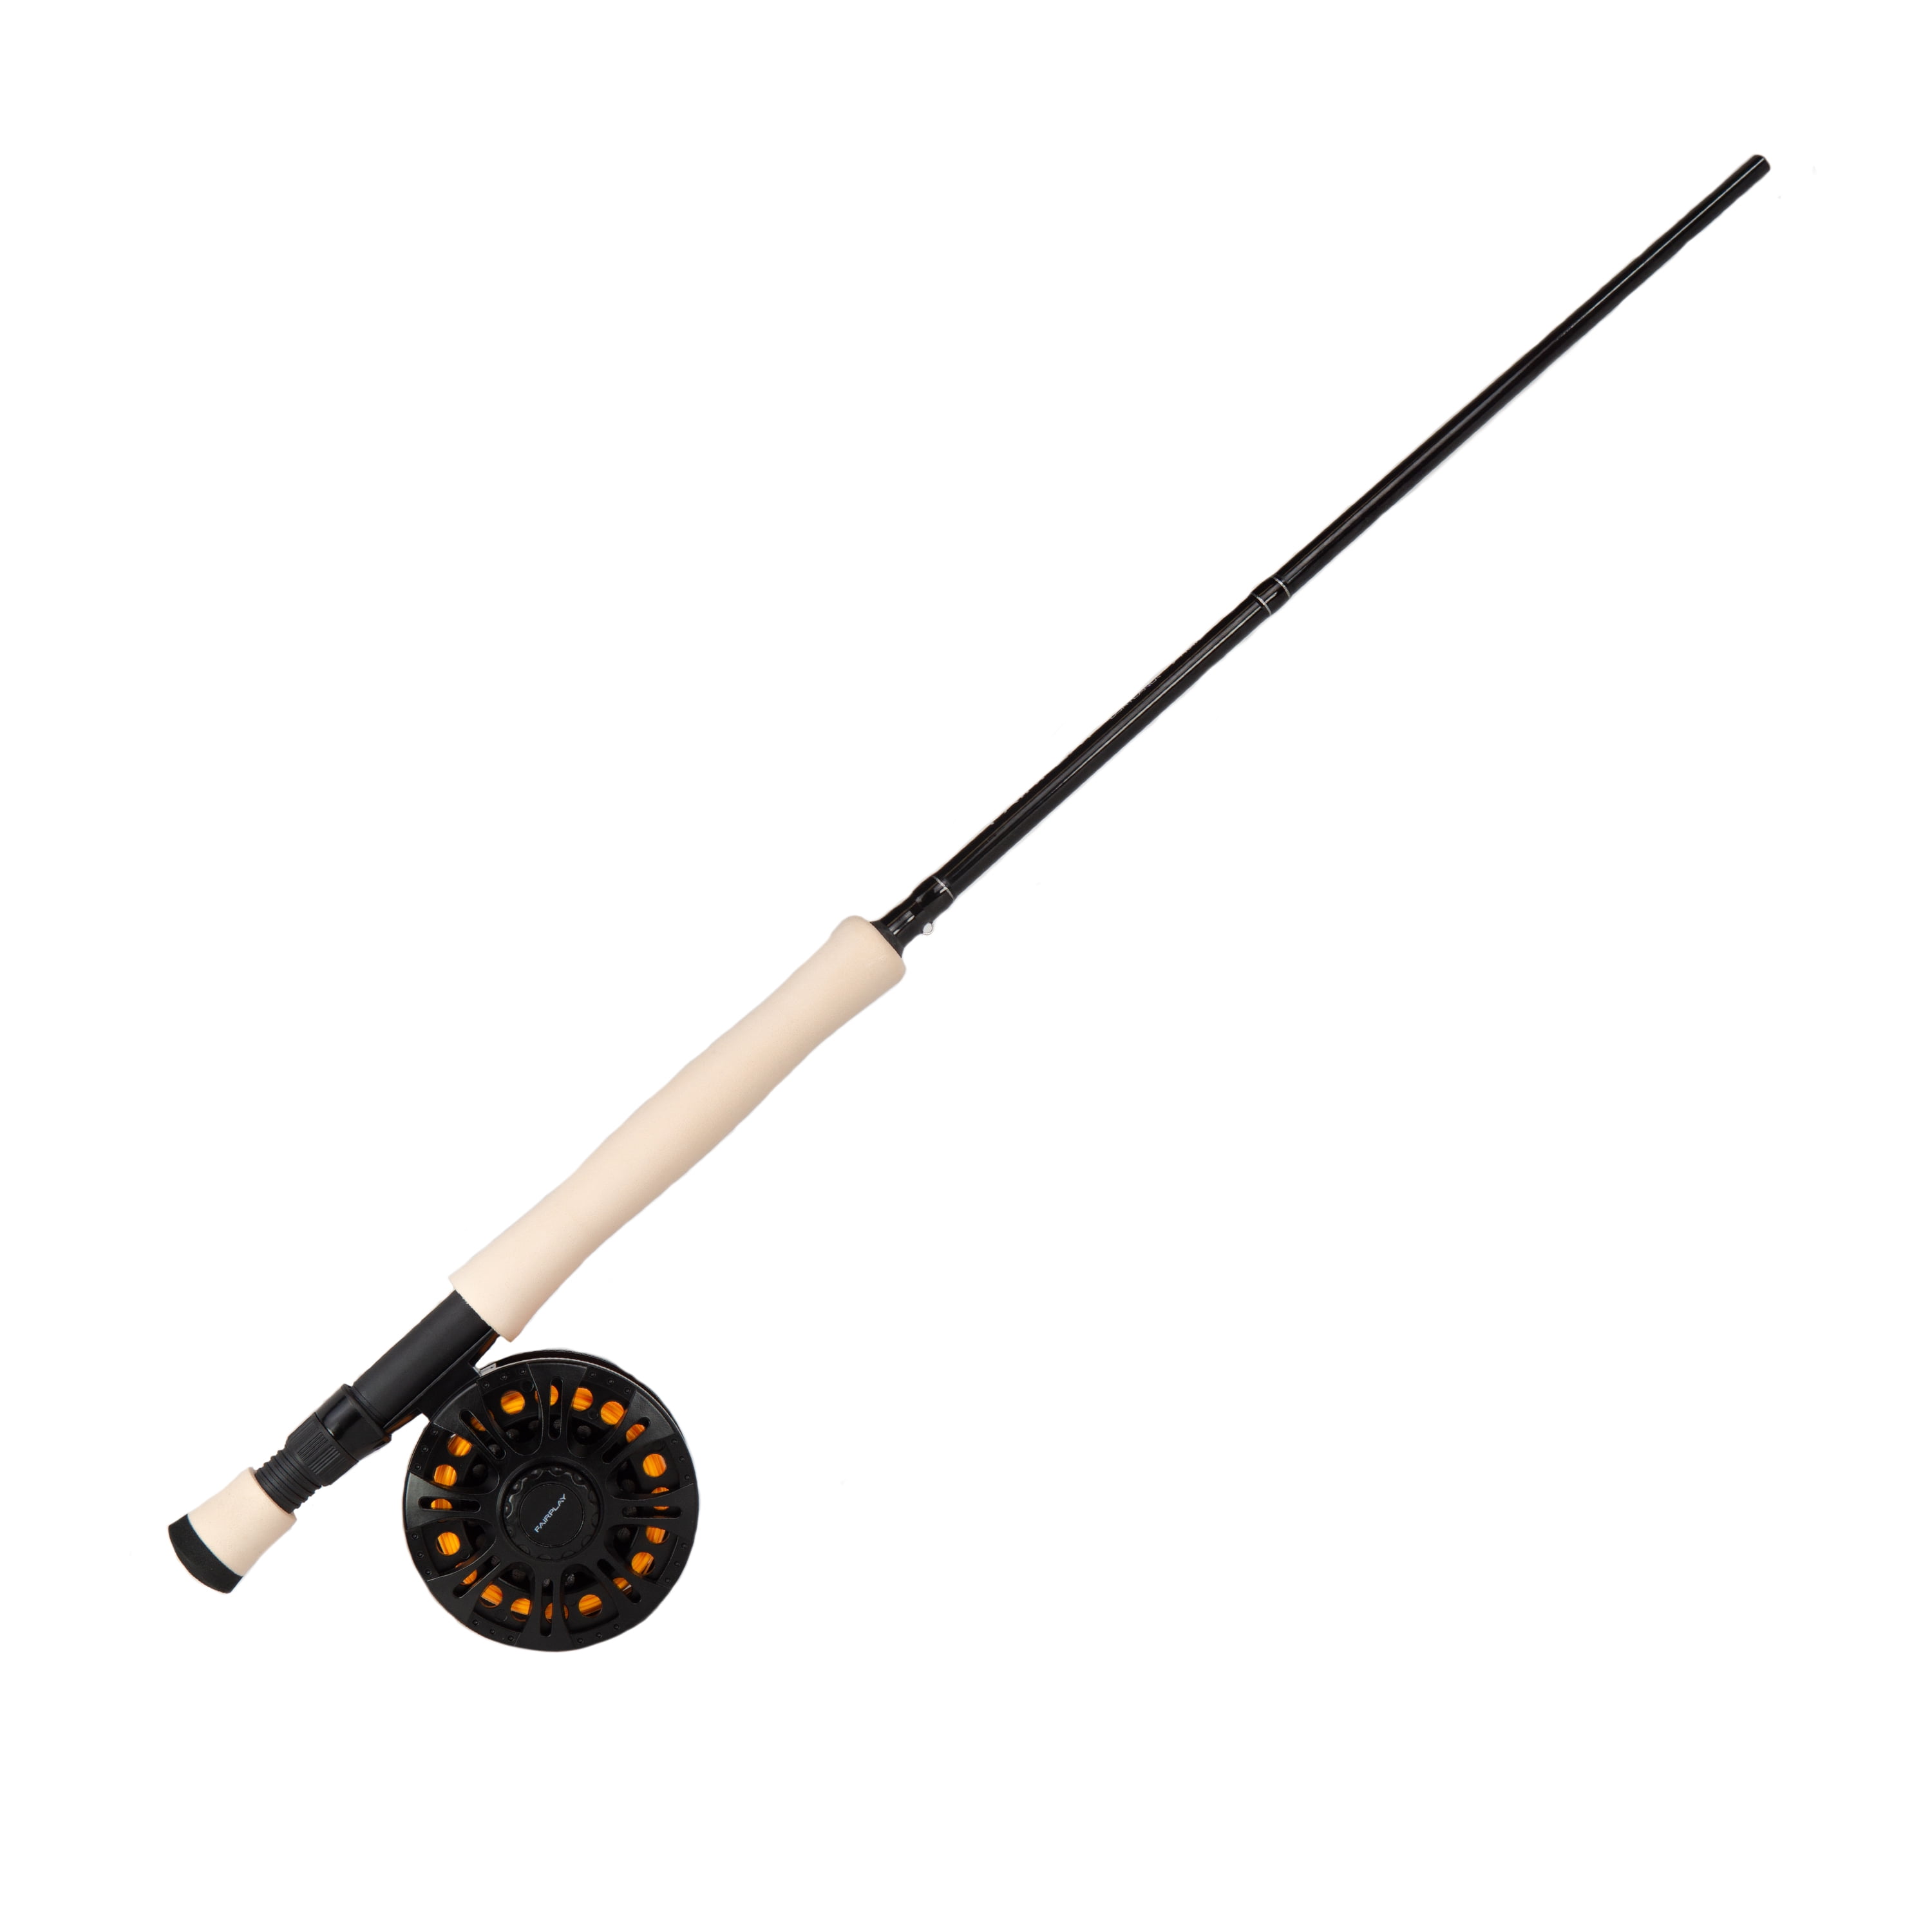 Cortland FairPlay 8' 6 Line Weight 6/7 Graphite Fly Rod Fishing Pole Slide  Ring